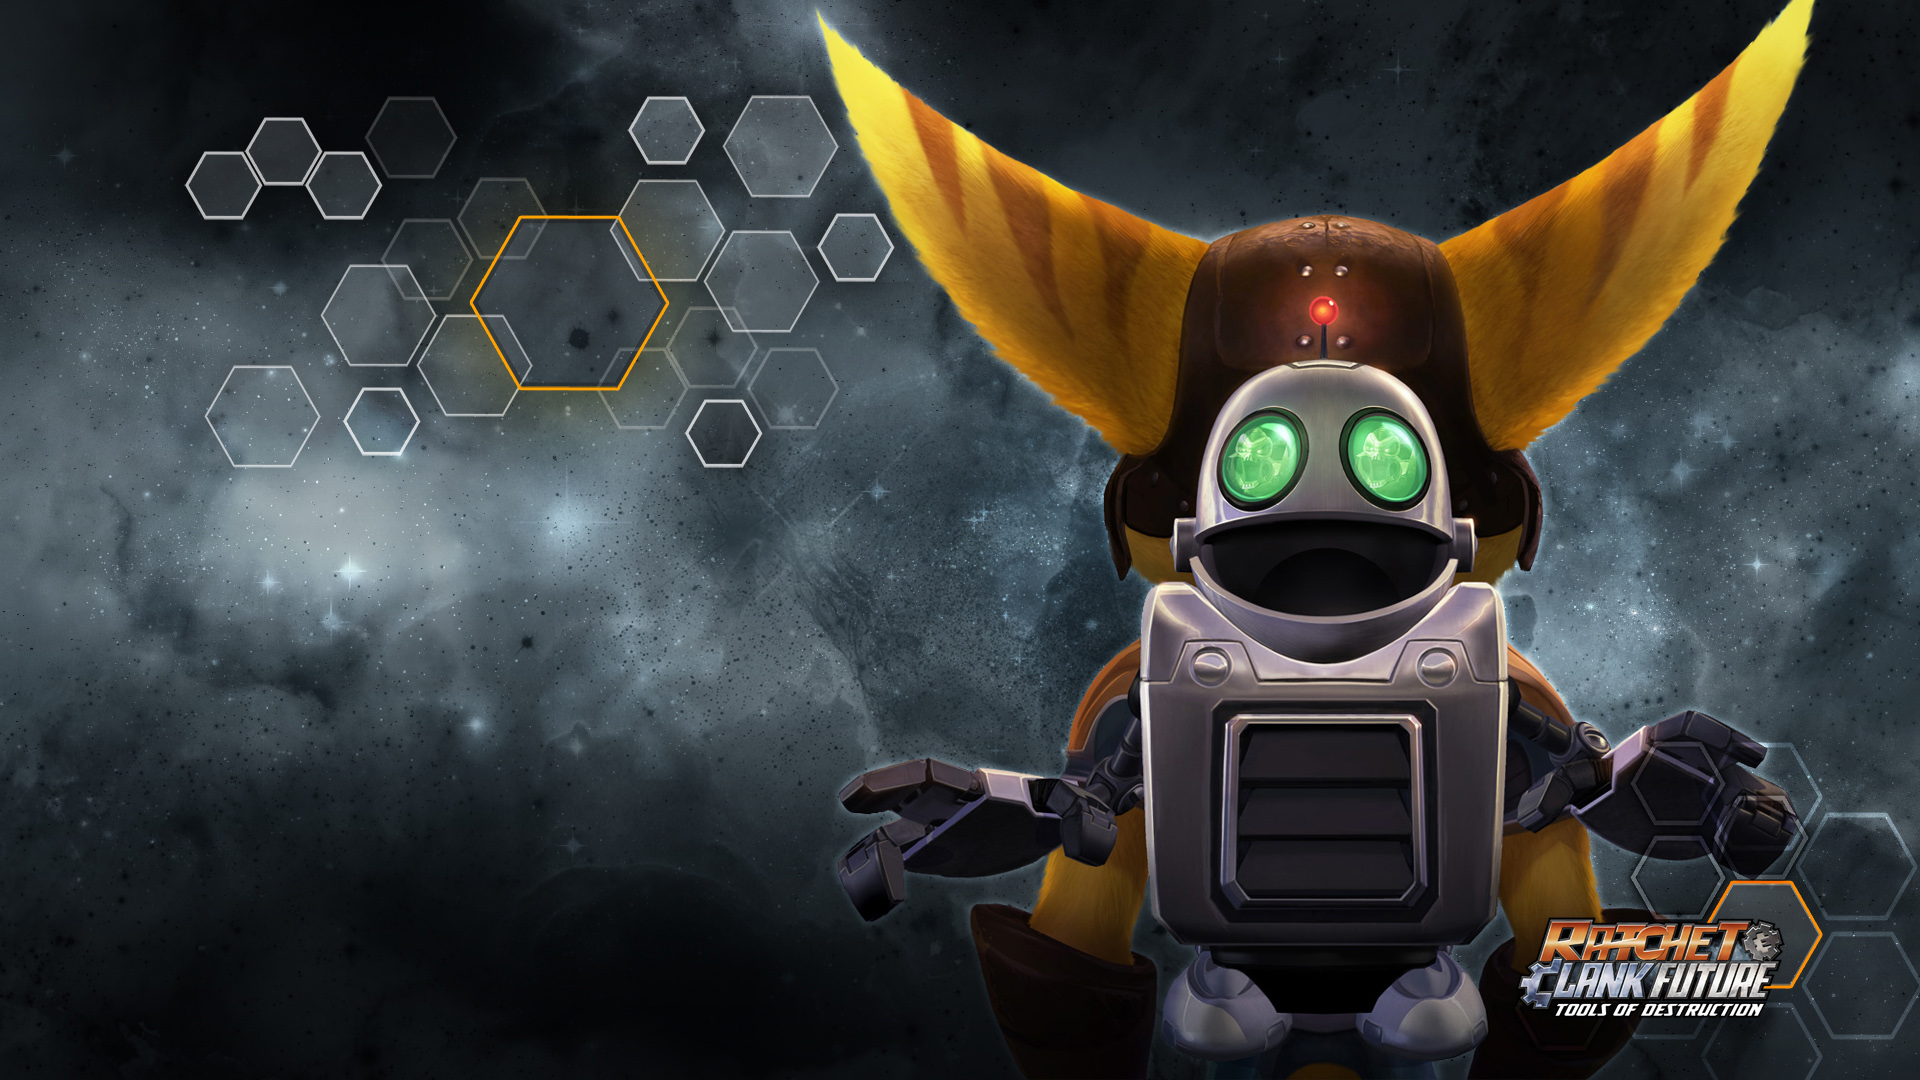 Video Game Ratchet & Clank Future: Tools of Destruction HD Wallpaper | Background Image